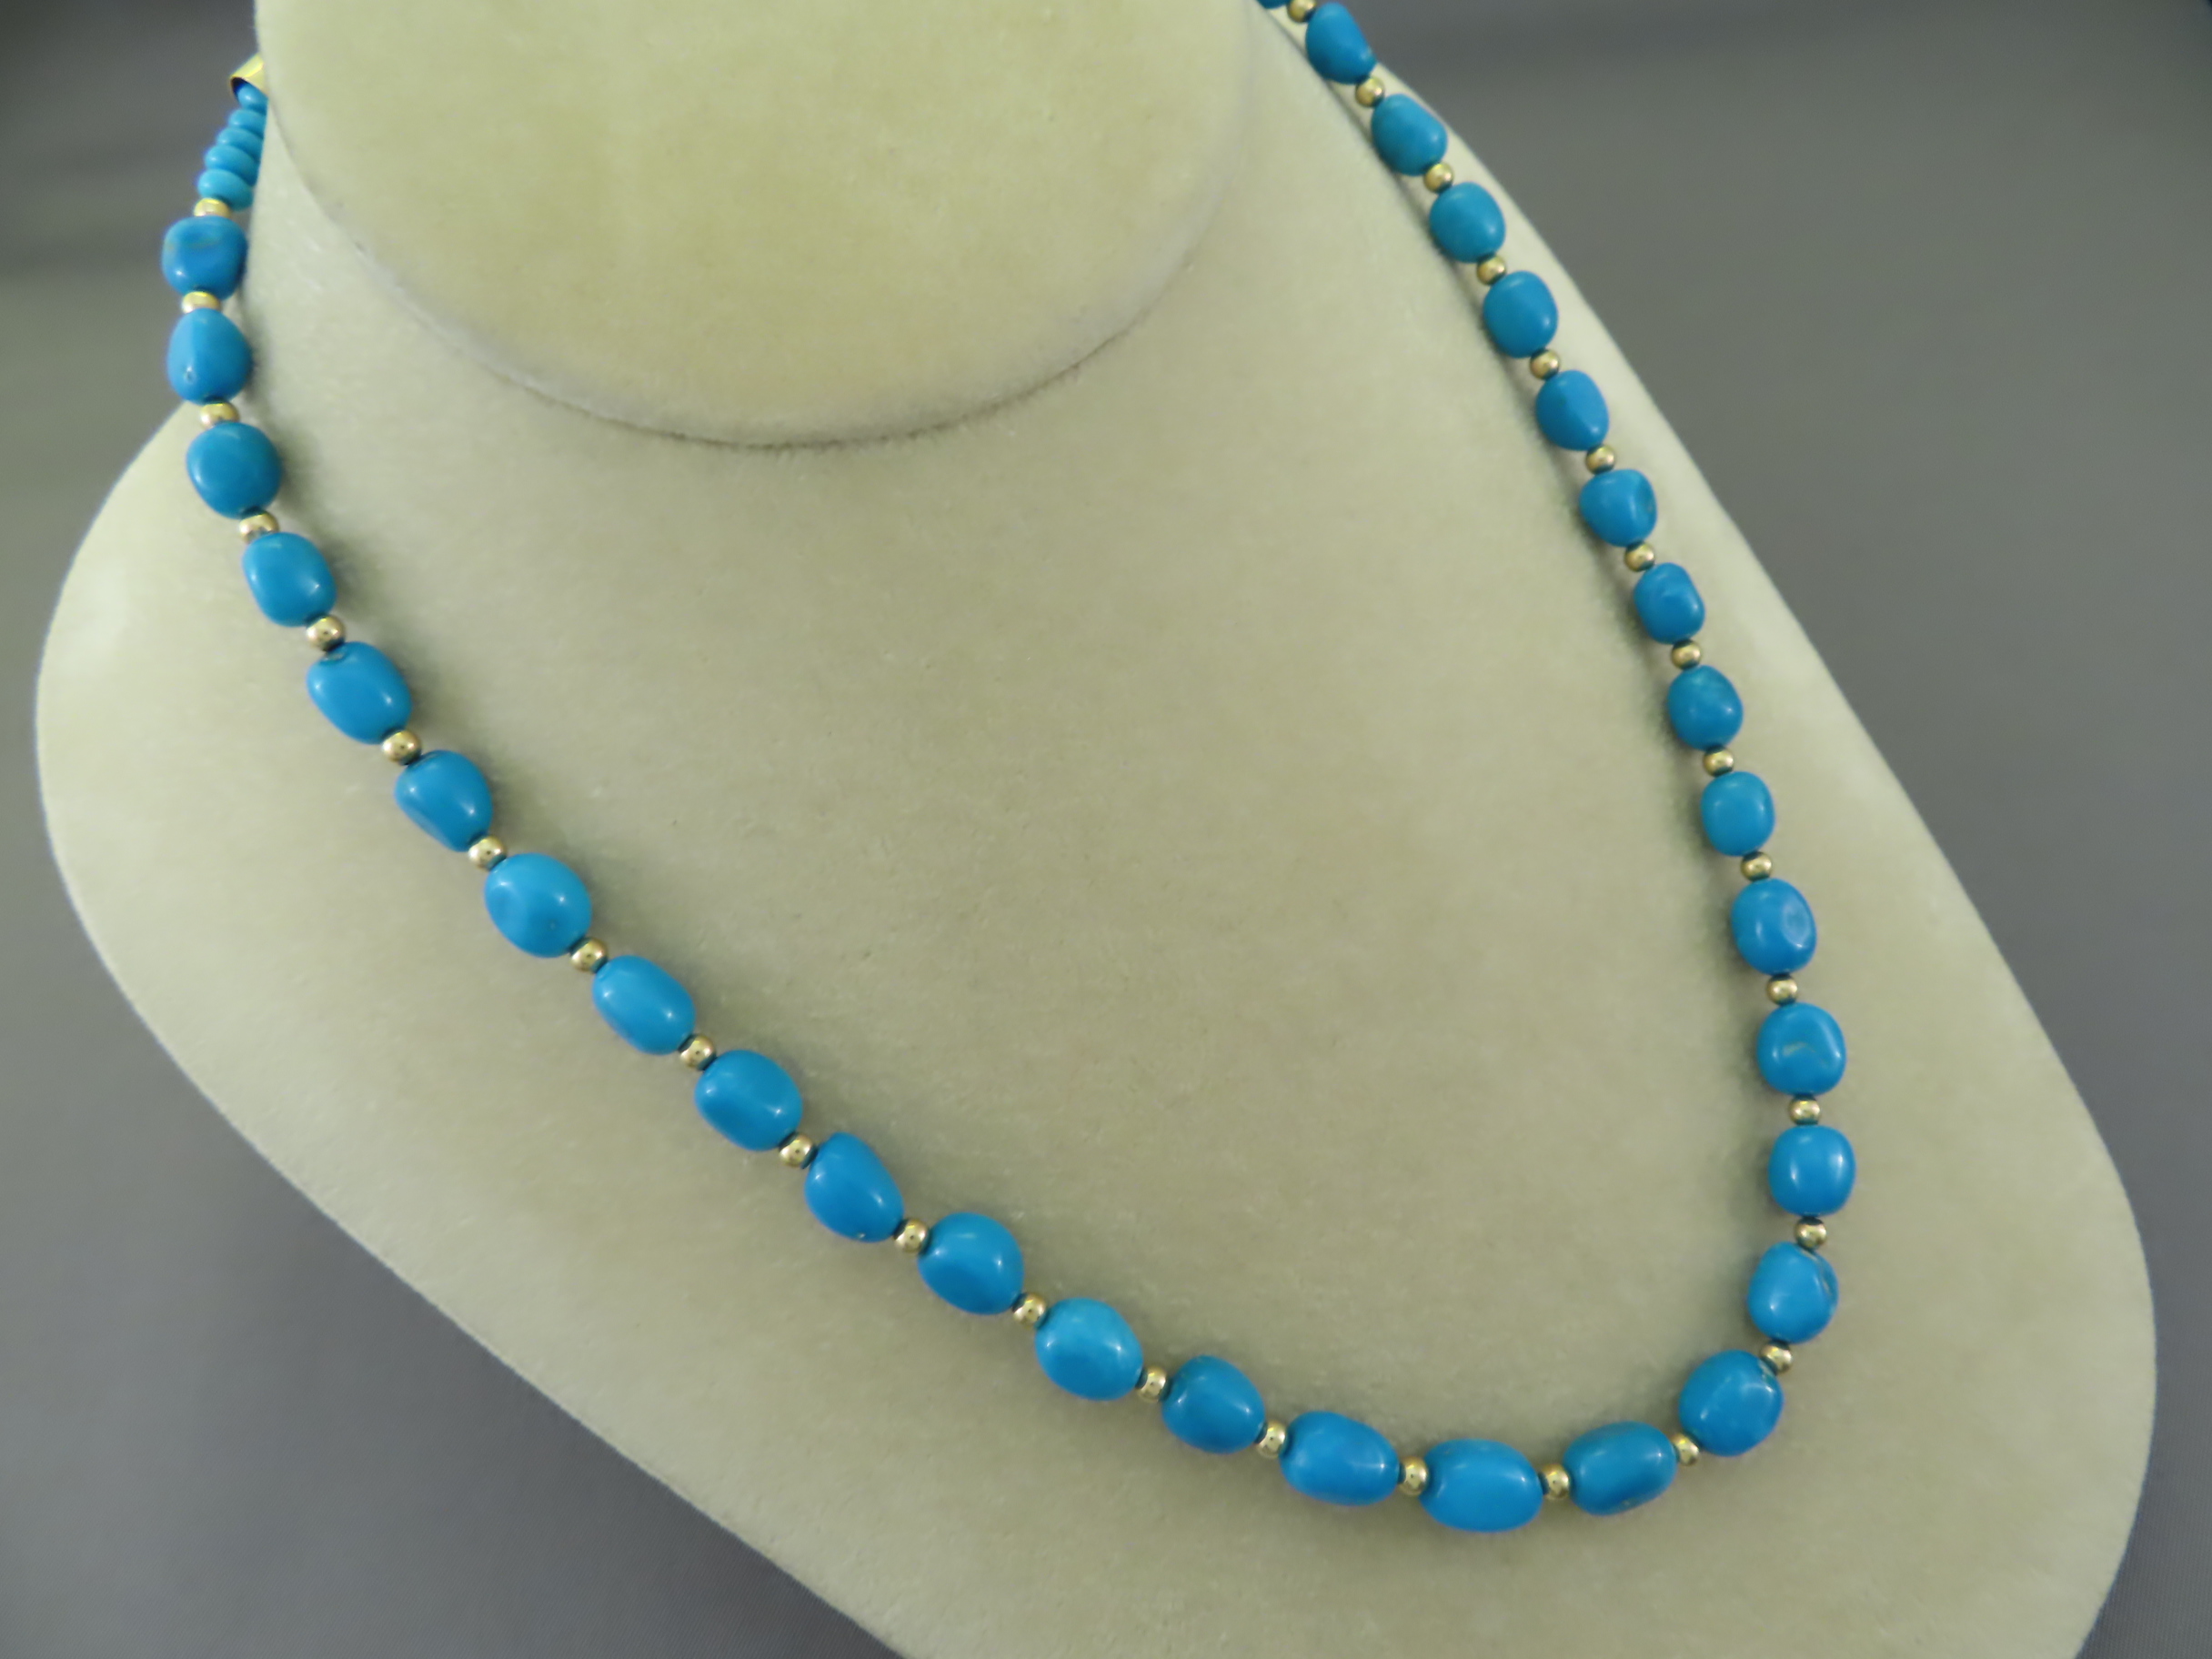 Sleeping Beauty Turquoise & 14kt Gold Bead Necklace - Turquoise